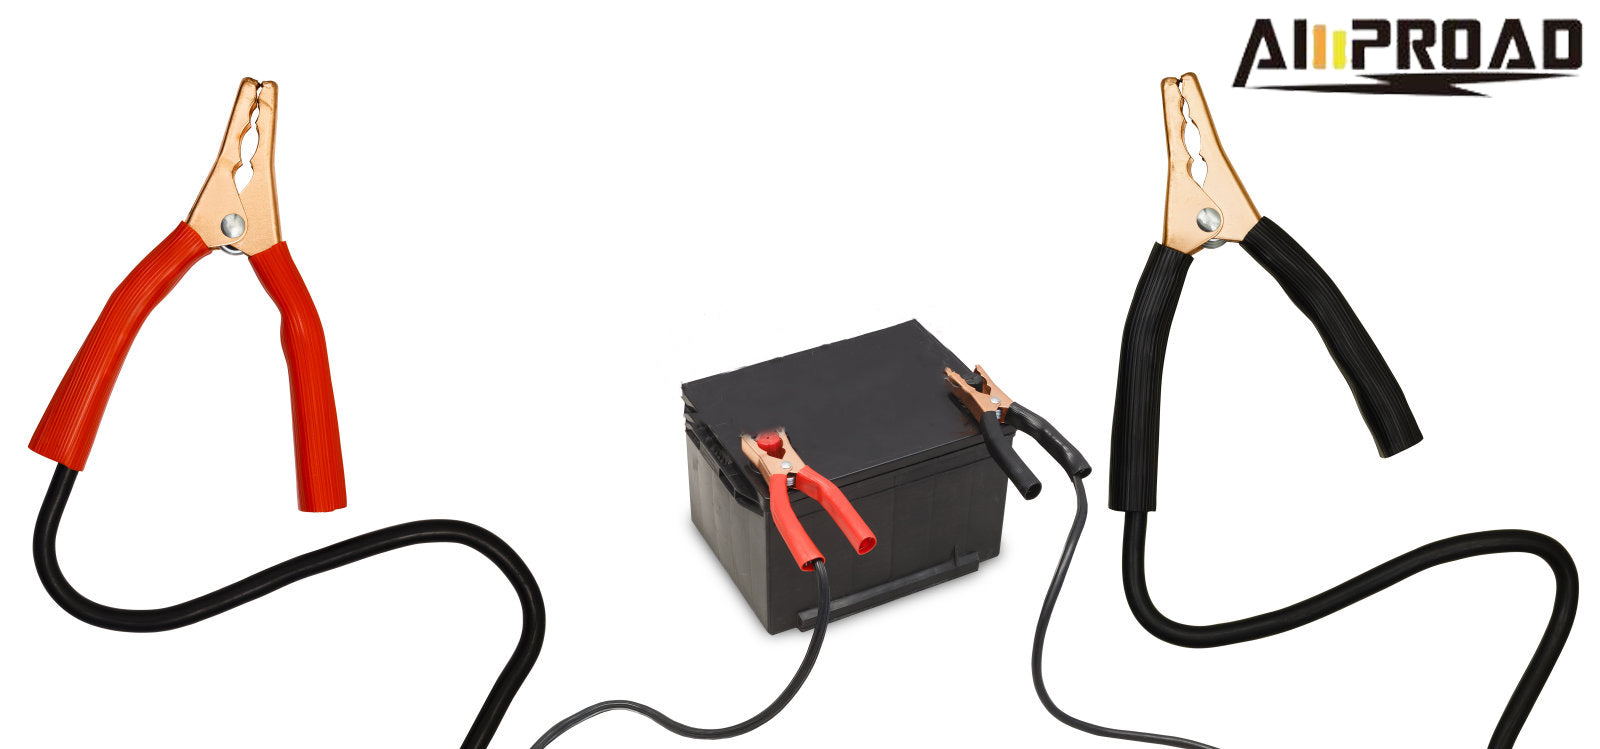 What is the difference between a jump starter and a battery charger?